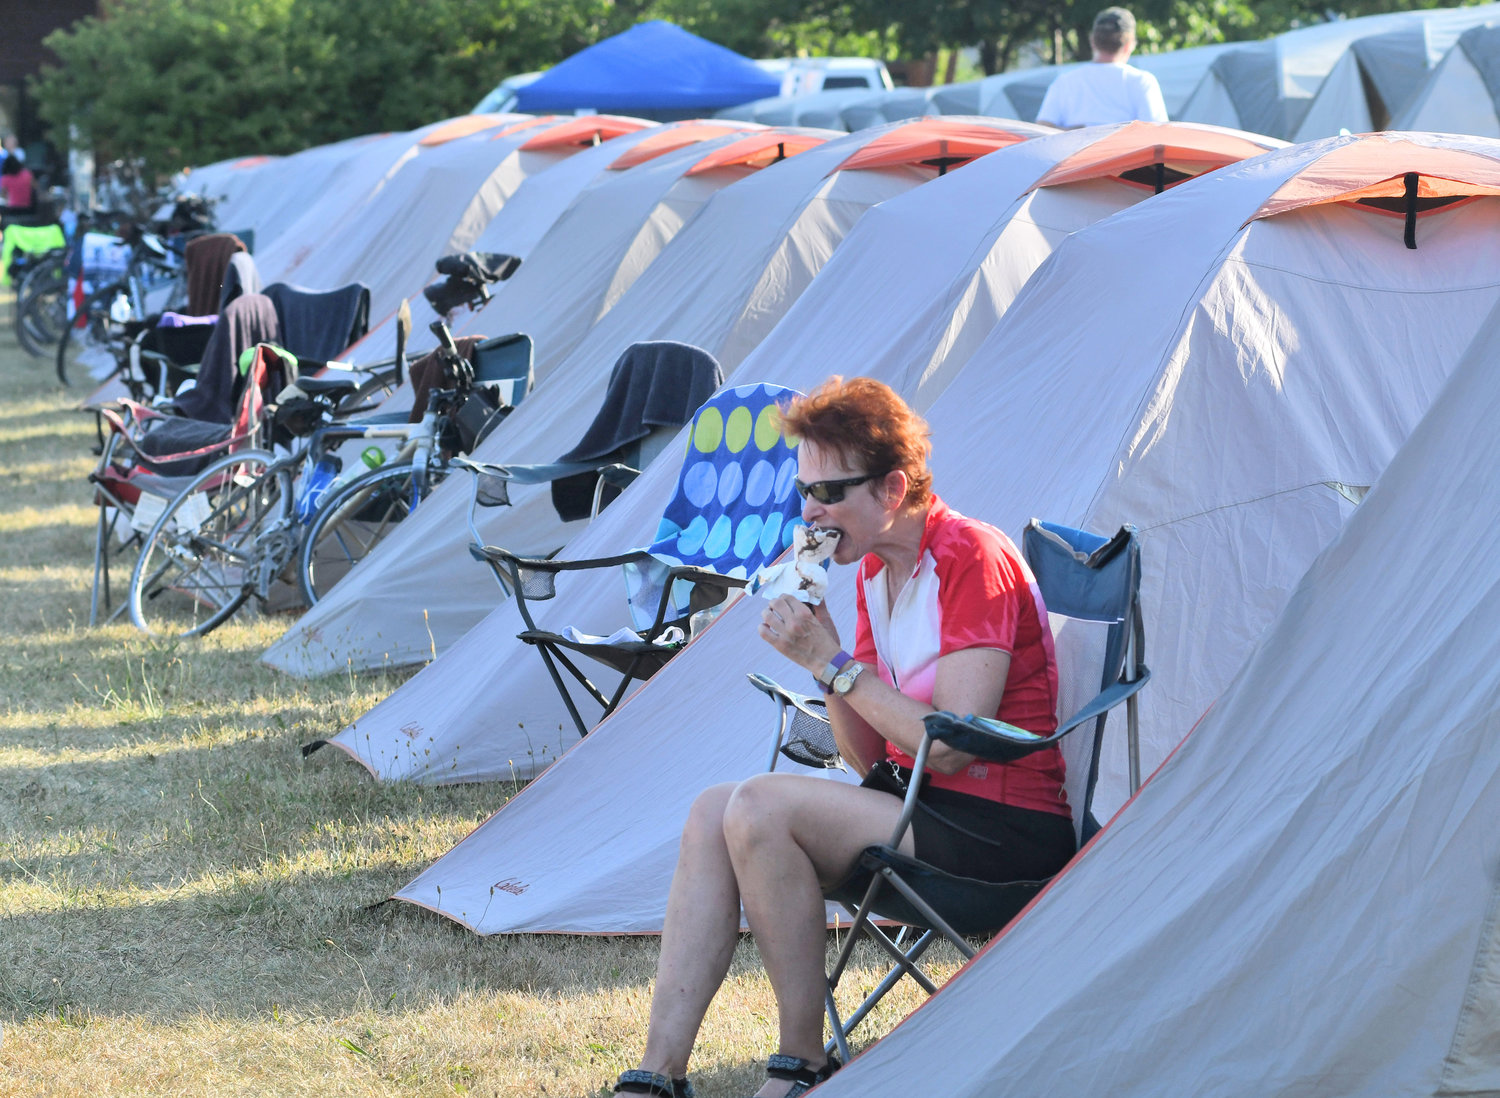 PIT STOP — Enolla Nelson from Raleigh, N.C., enjoys ice cream after a hot day on her bike, as riders during the 2018 Cycle the Erie Canal Bike Tour spent a night in Rome. More than 700 riders are expected to camp out on the Fort Stanwix lawn in this year’s event on Thursday.